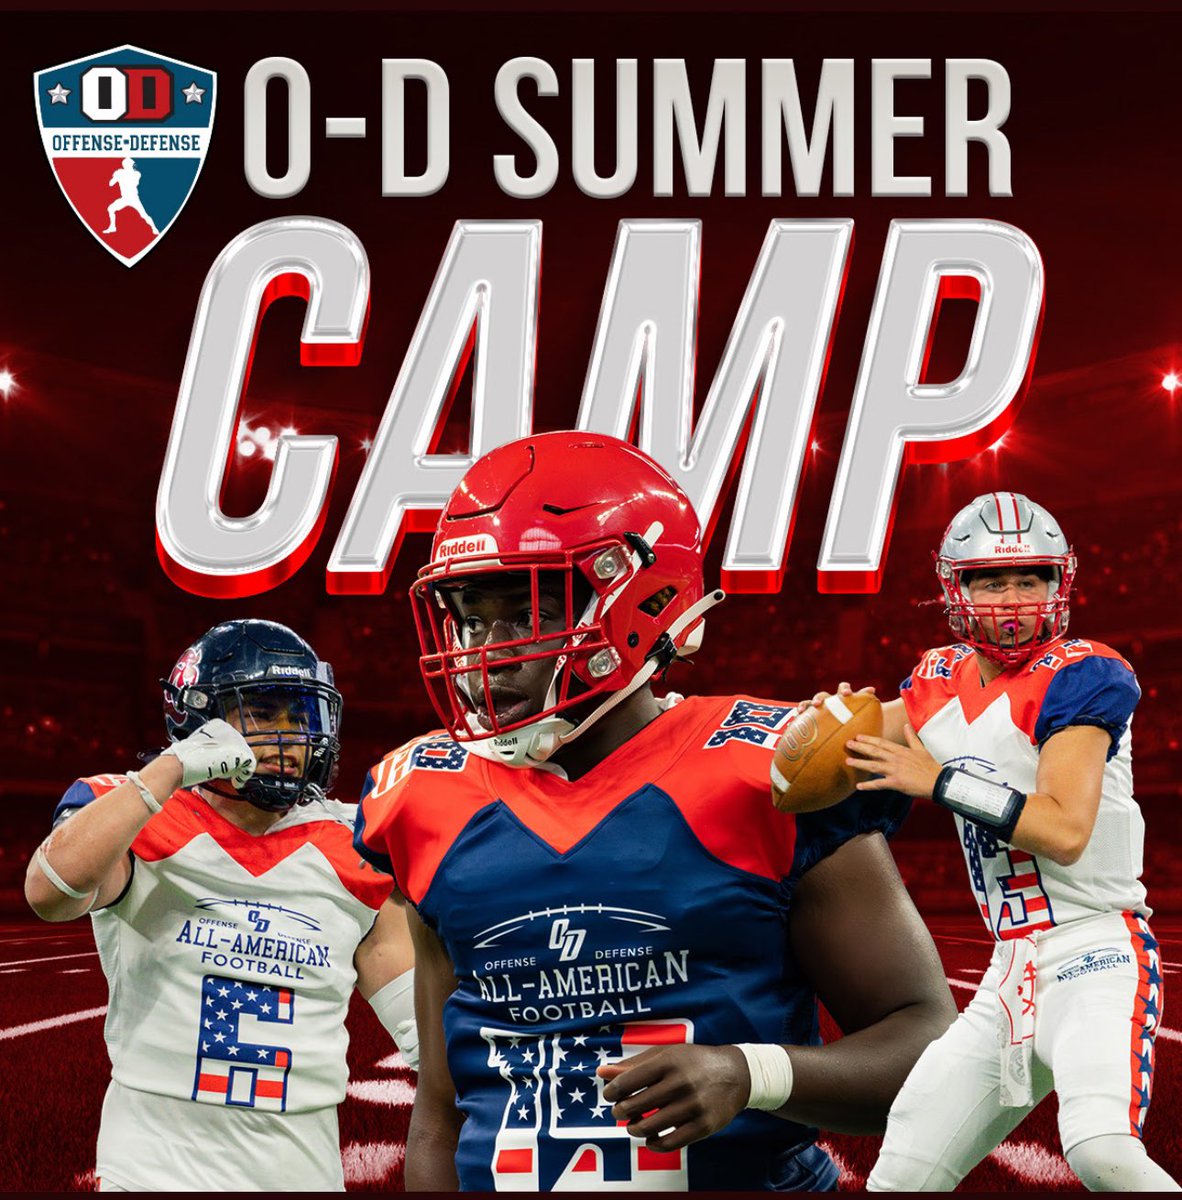 Thankful for the invitation to the @ODFBall Summer Camp